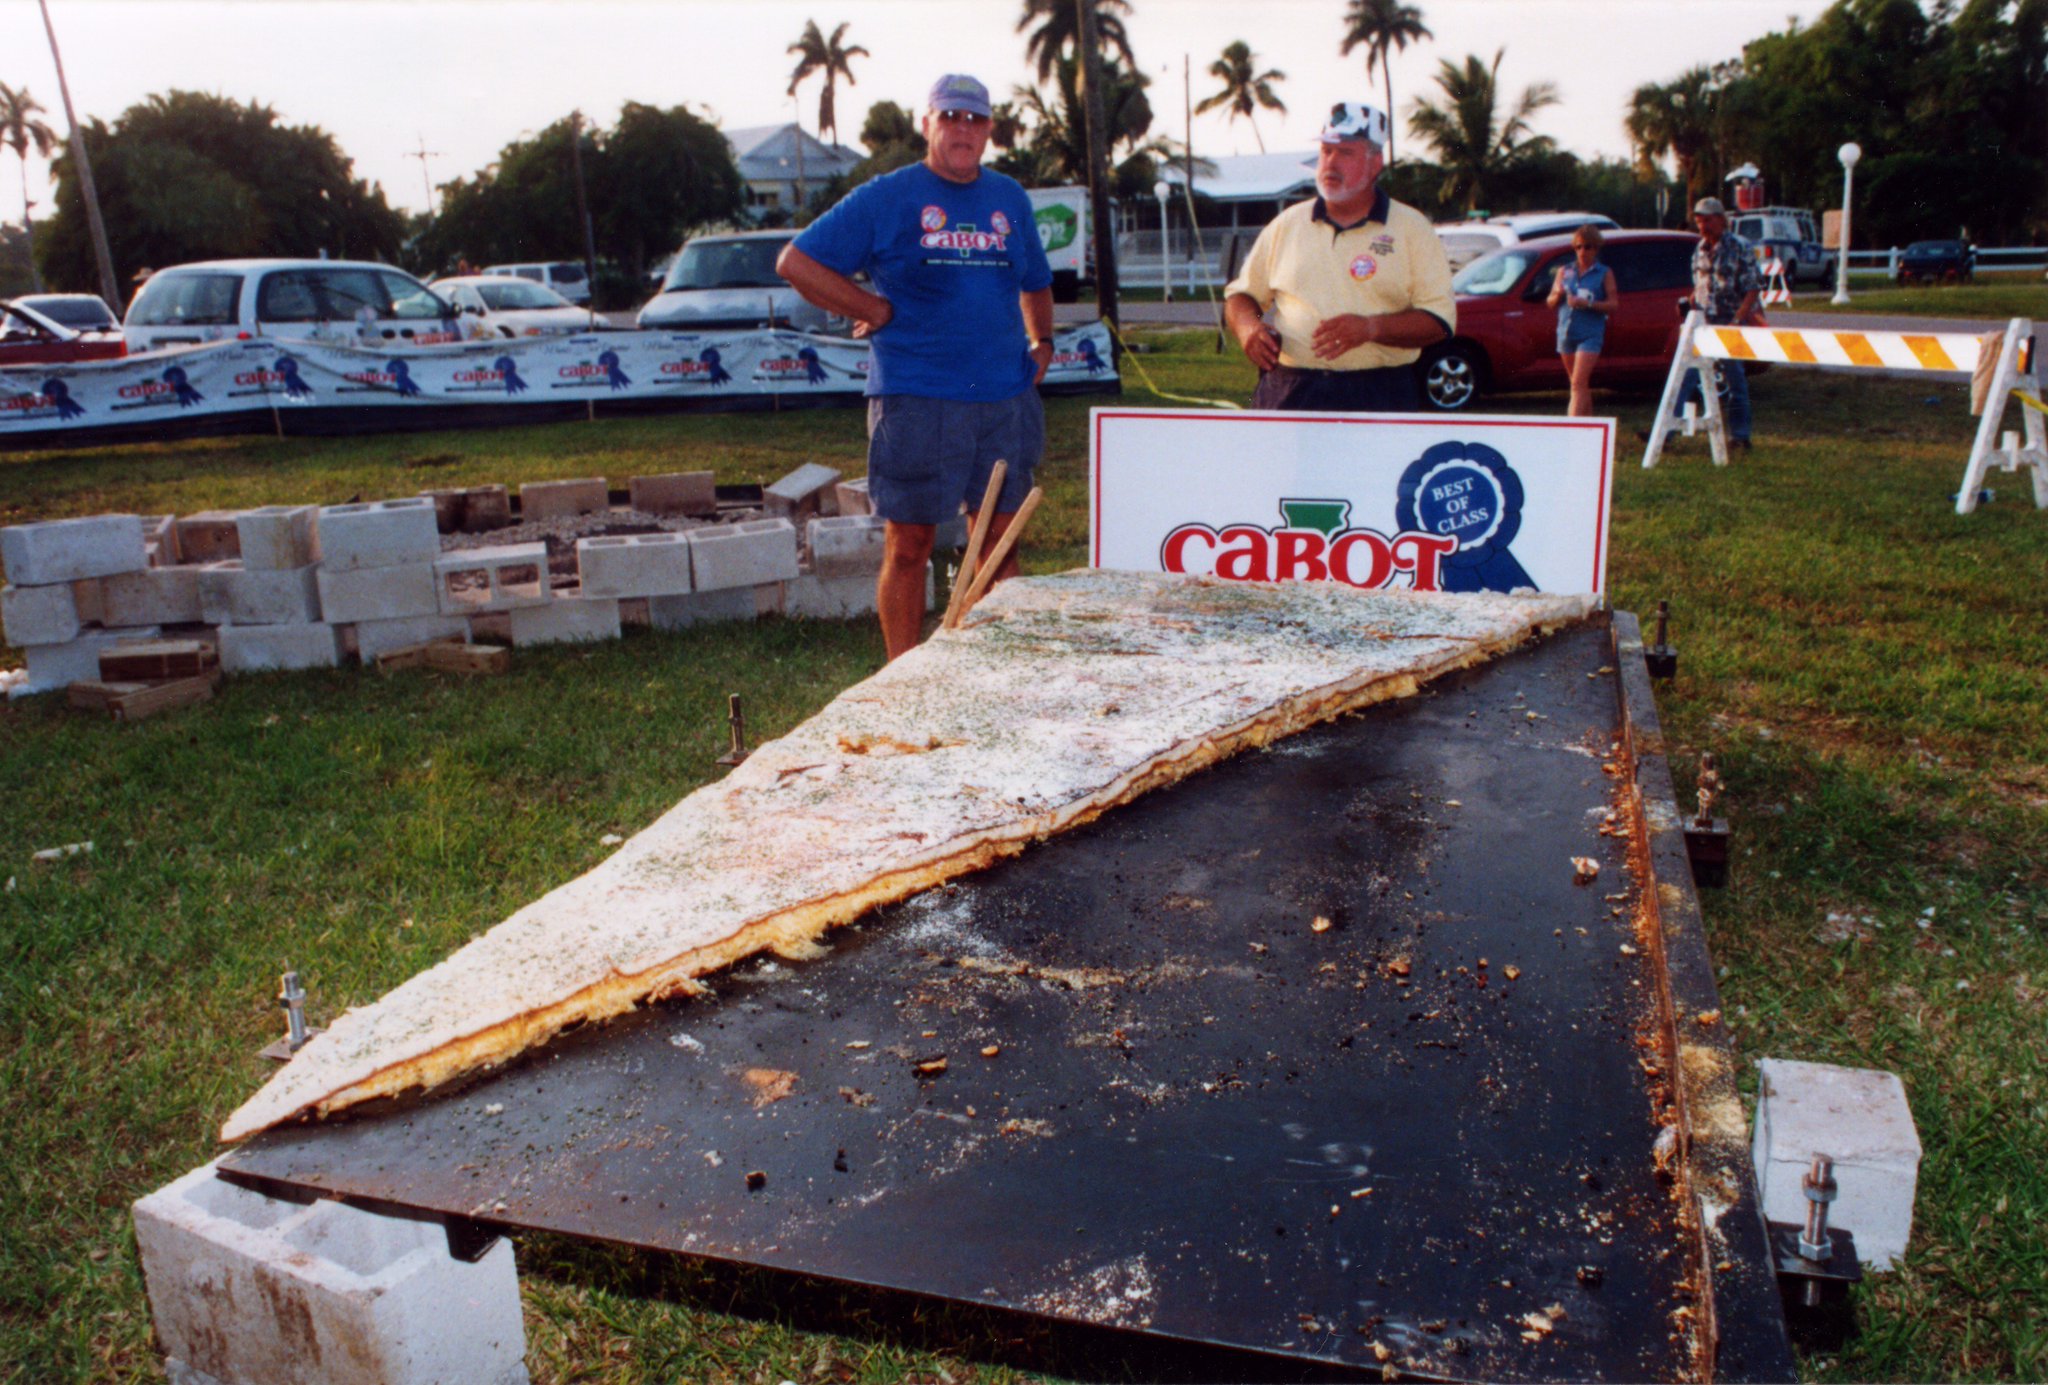 GWR2024 OUT NOW on X: "#DYK @cabotcheese of Vermont made the world's  largest grilled cheese sandwich weighing 145 kg (320 lb) in 2000?  #NationalGrilledCheeseDay 🧀 https://t.co/VvYWgE2IQg" / X